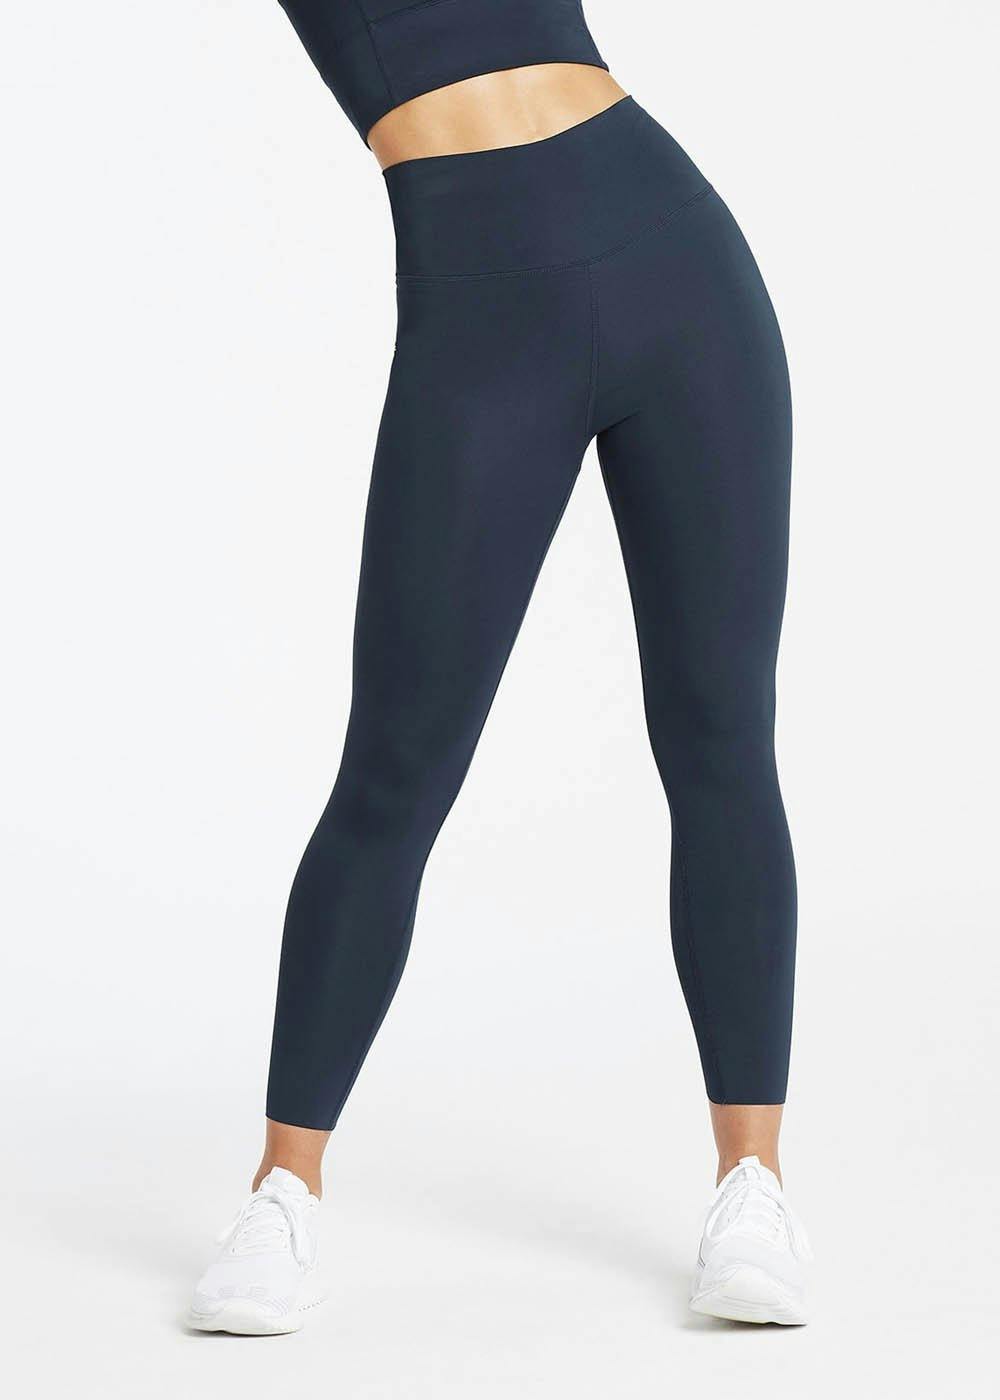 Best activewear: 9 high-waisted gym leggings to buy now